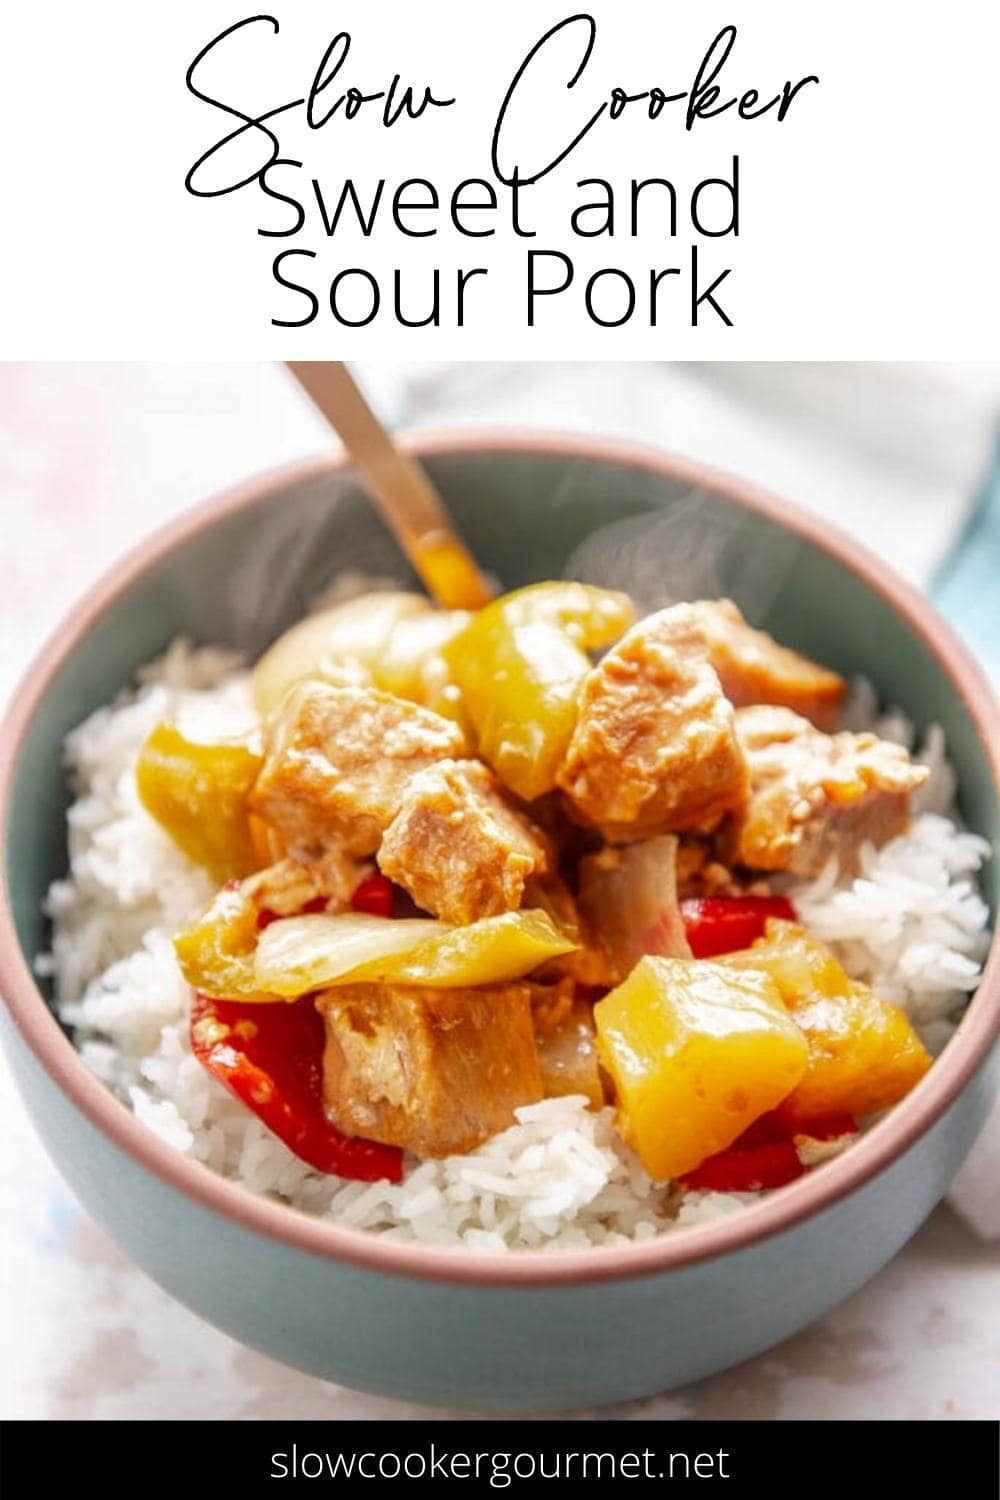 Slow Cooker Sweet and Sour Pork - Slow Cooker Gourmet